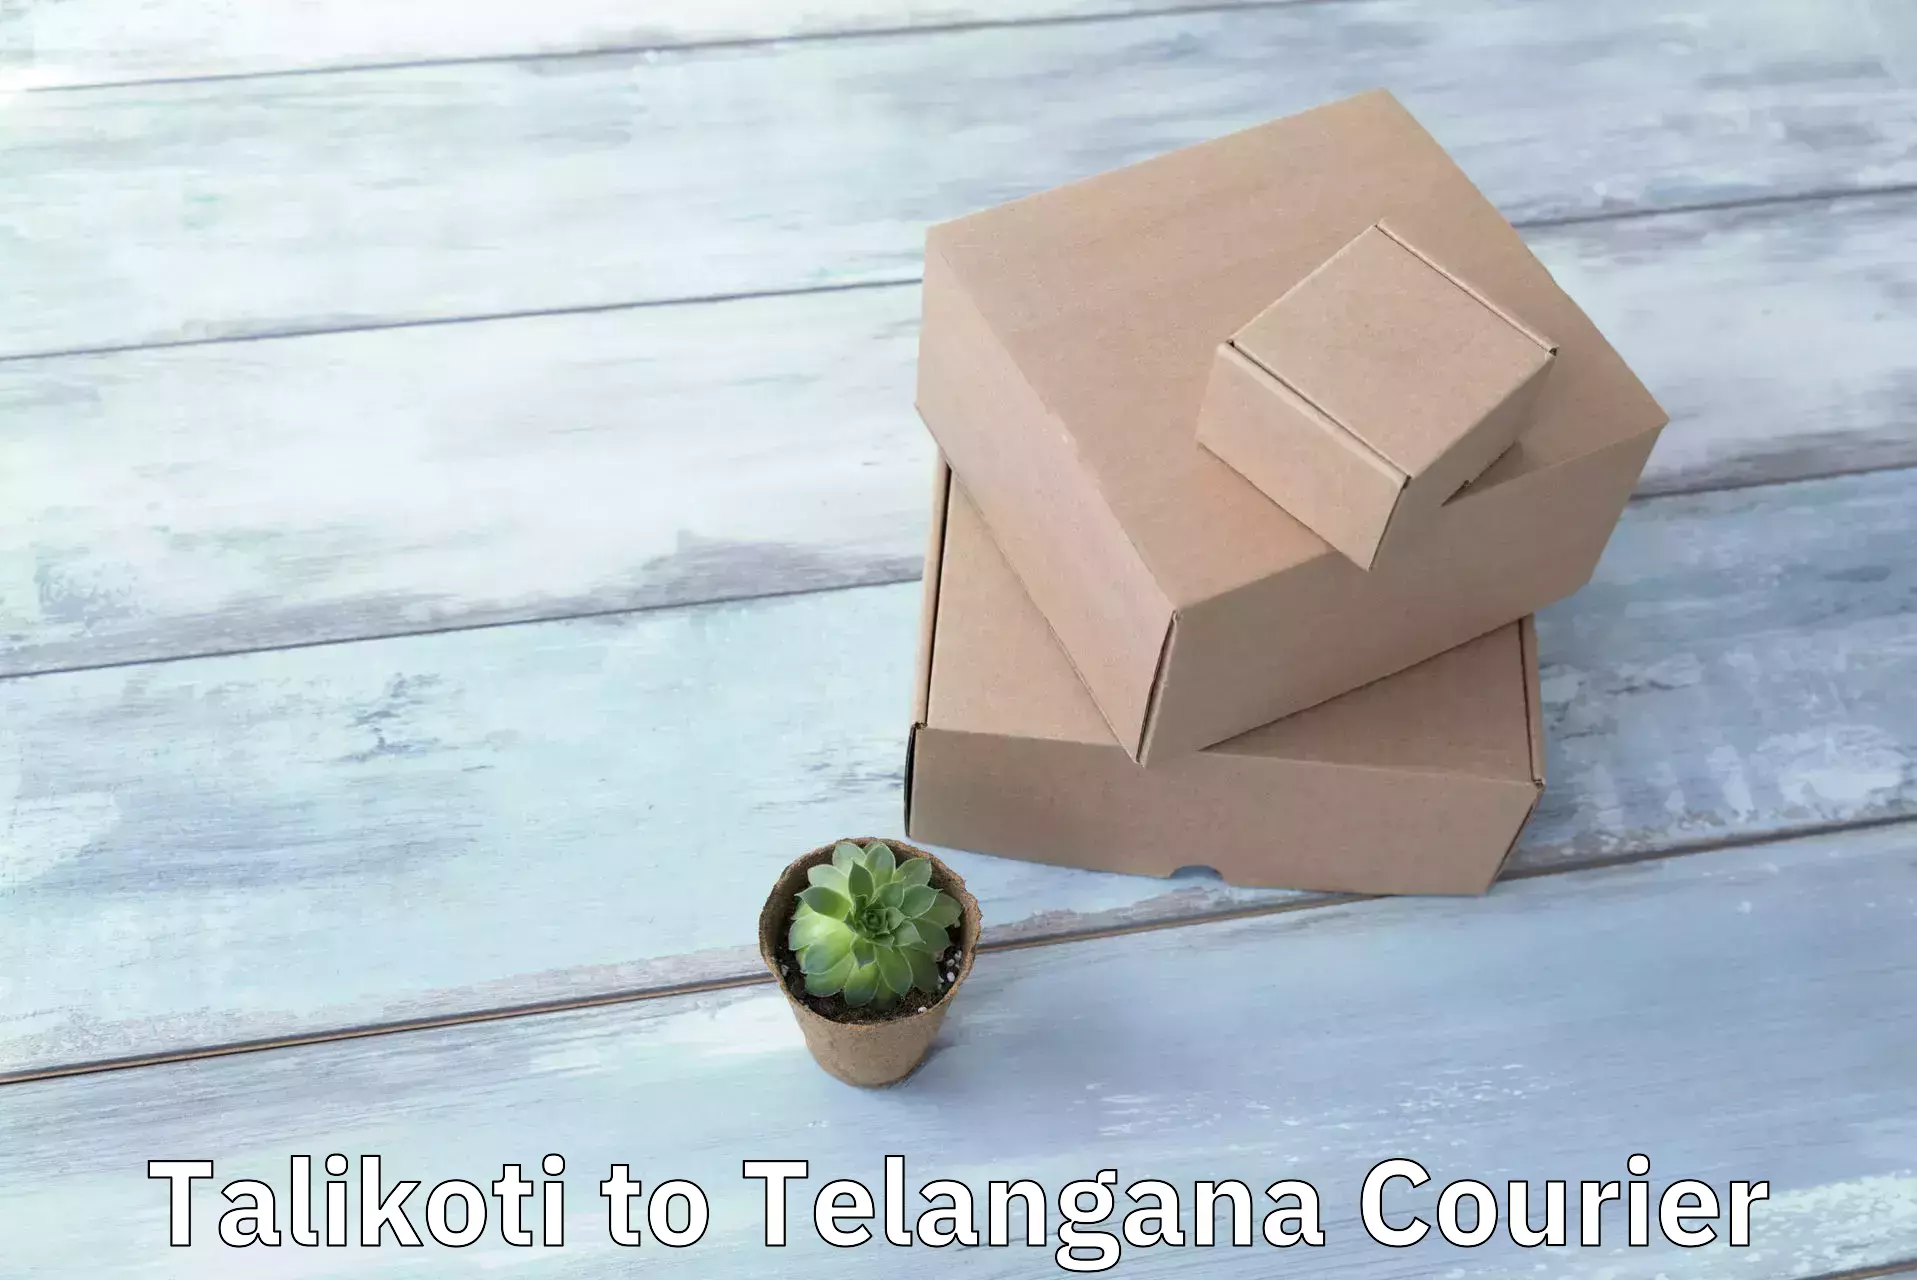 Fast delivery service Talikoti to Bhadrachalam